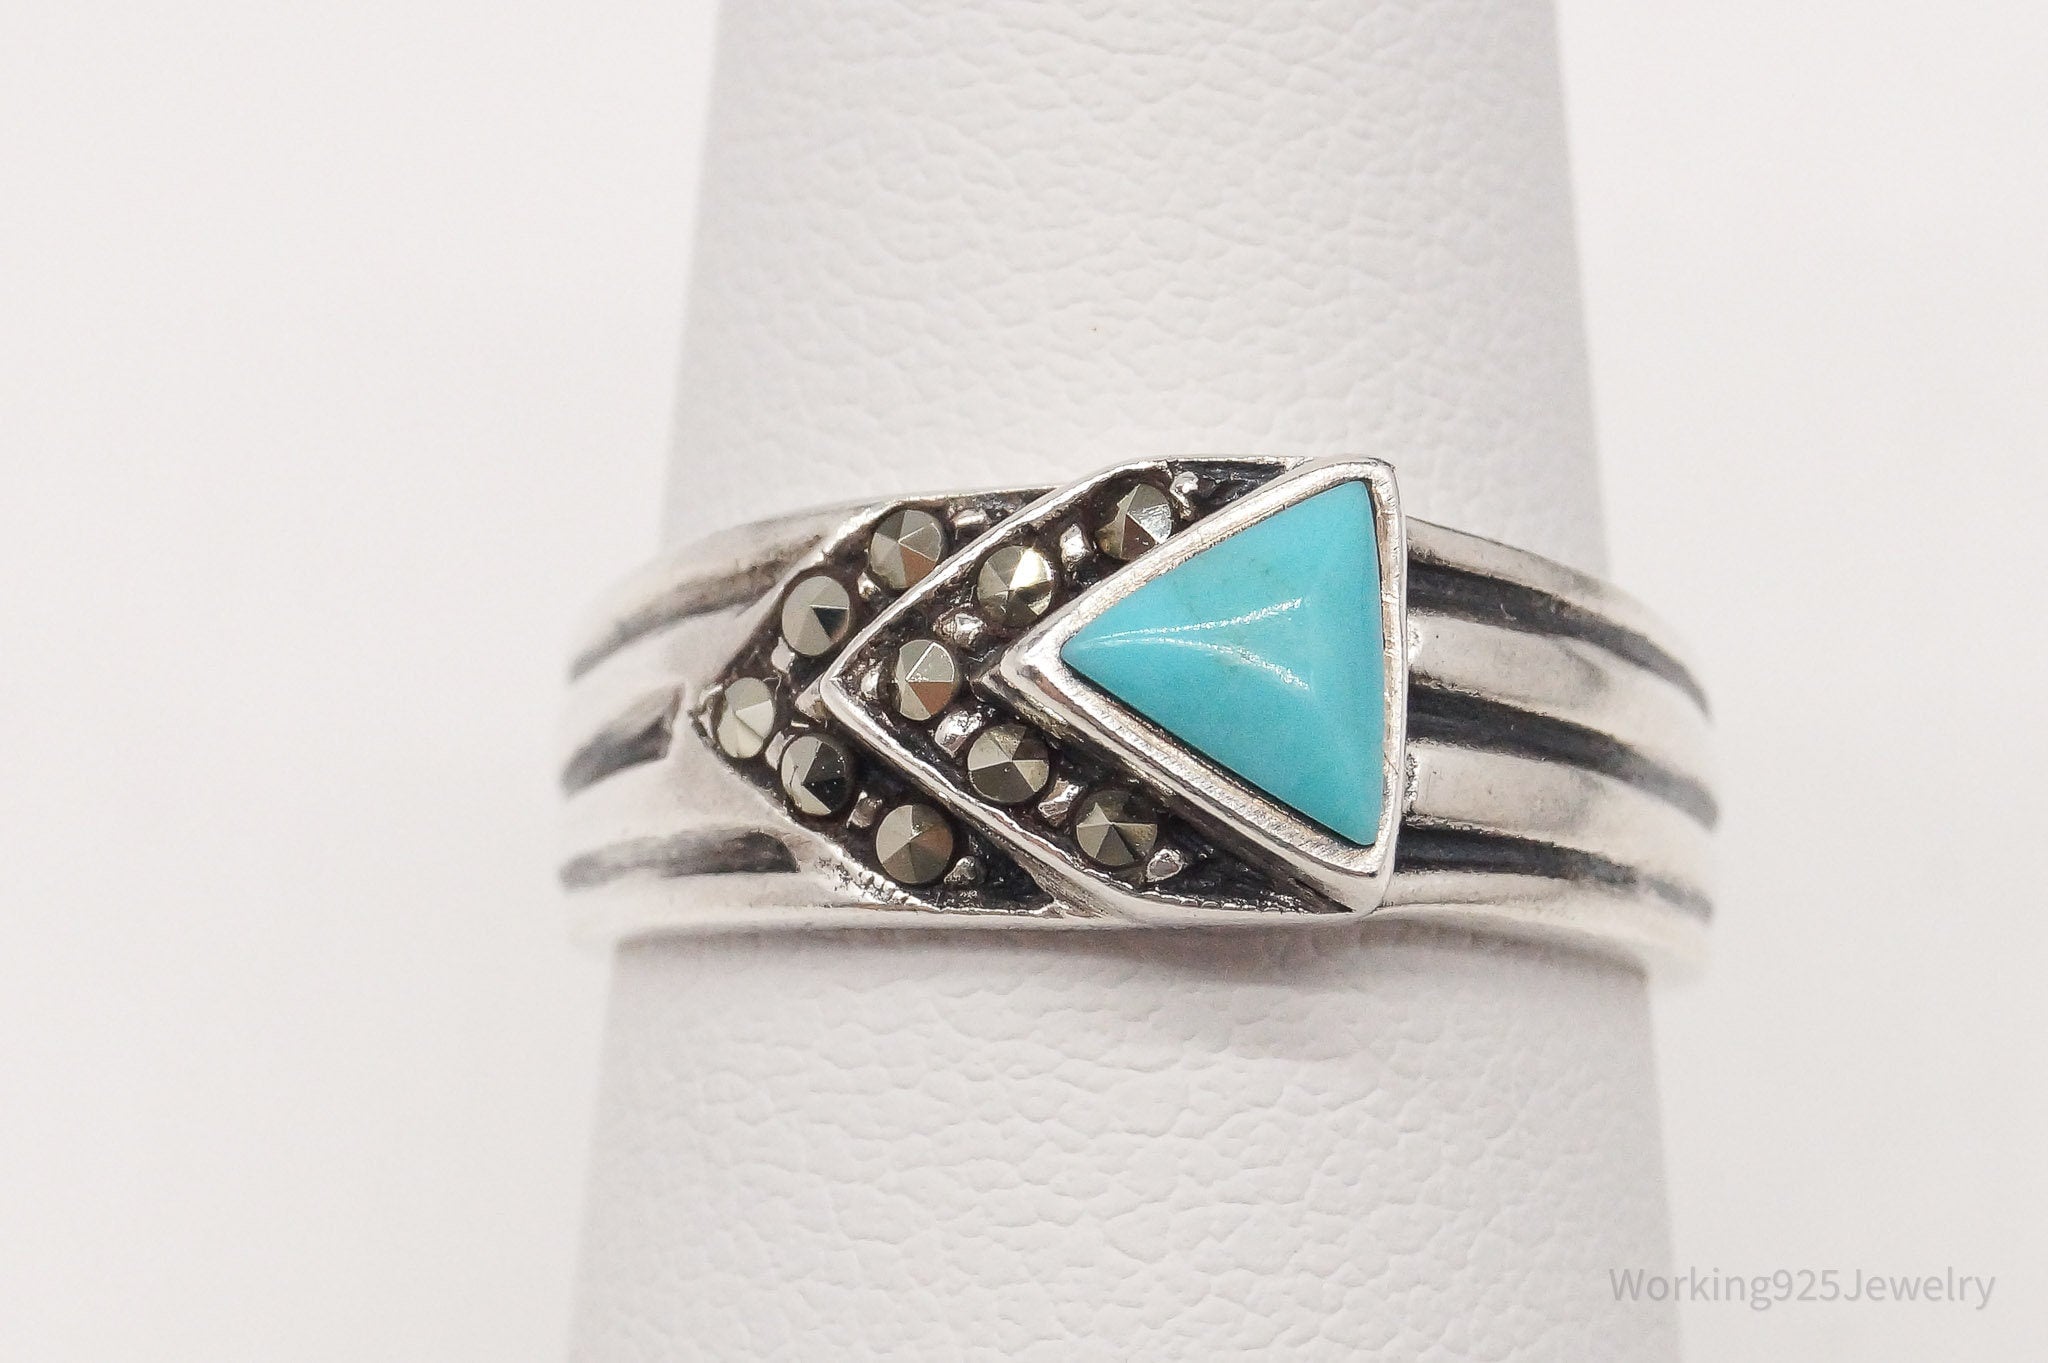 Vintage Turquoise Marcasite Sterling Silver Ring - Size 6.5